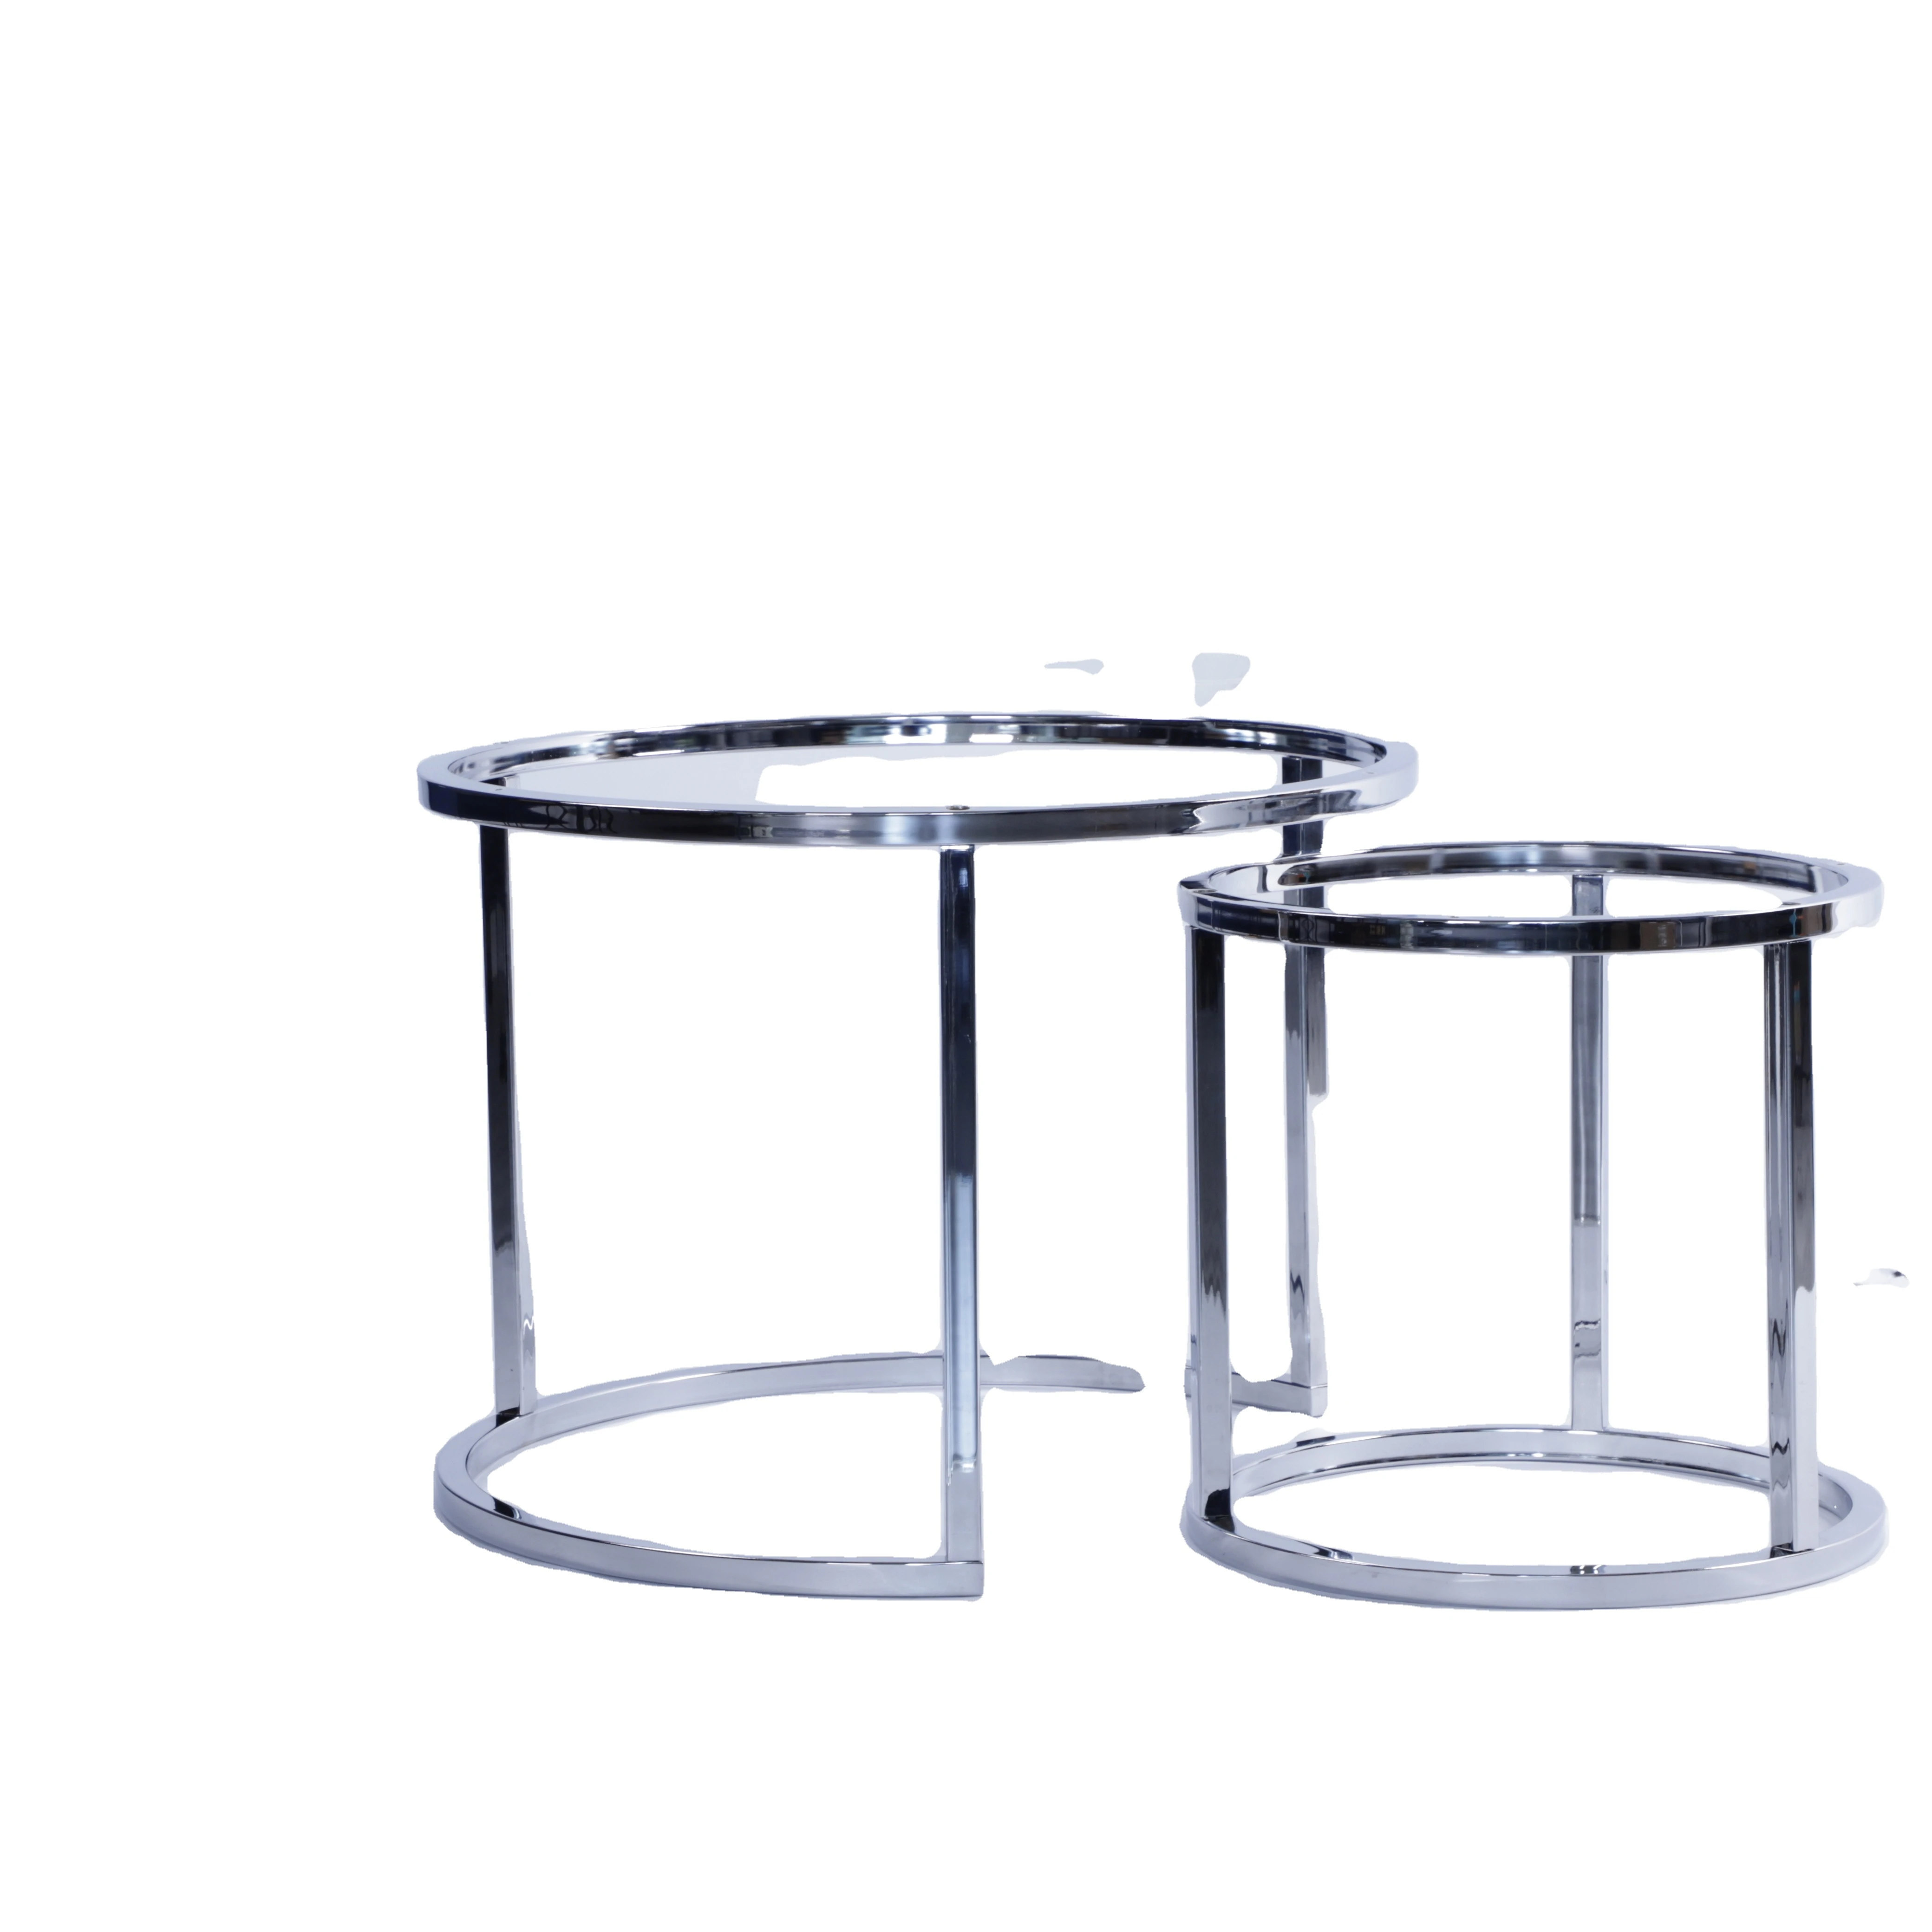 Glossy high quality round metal coffee table base